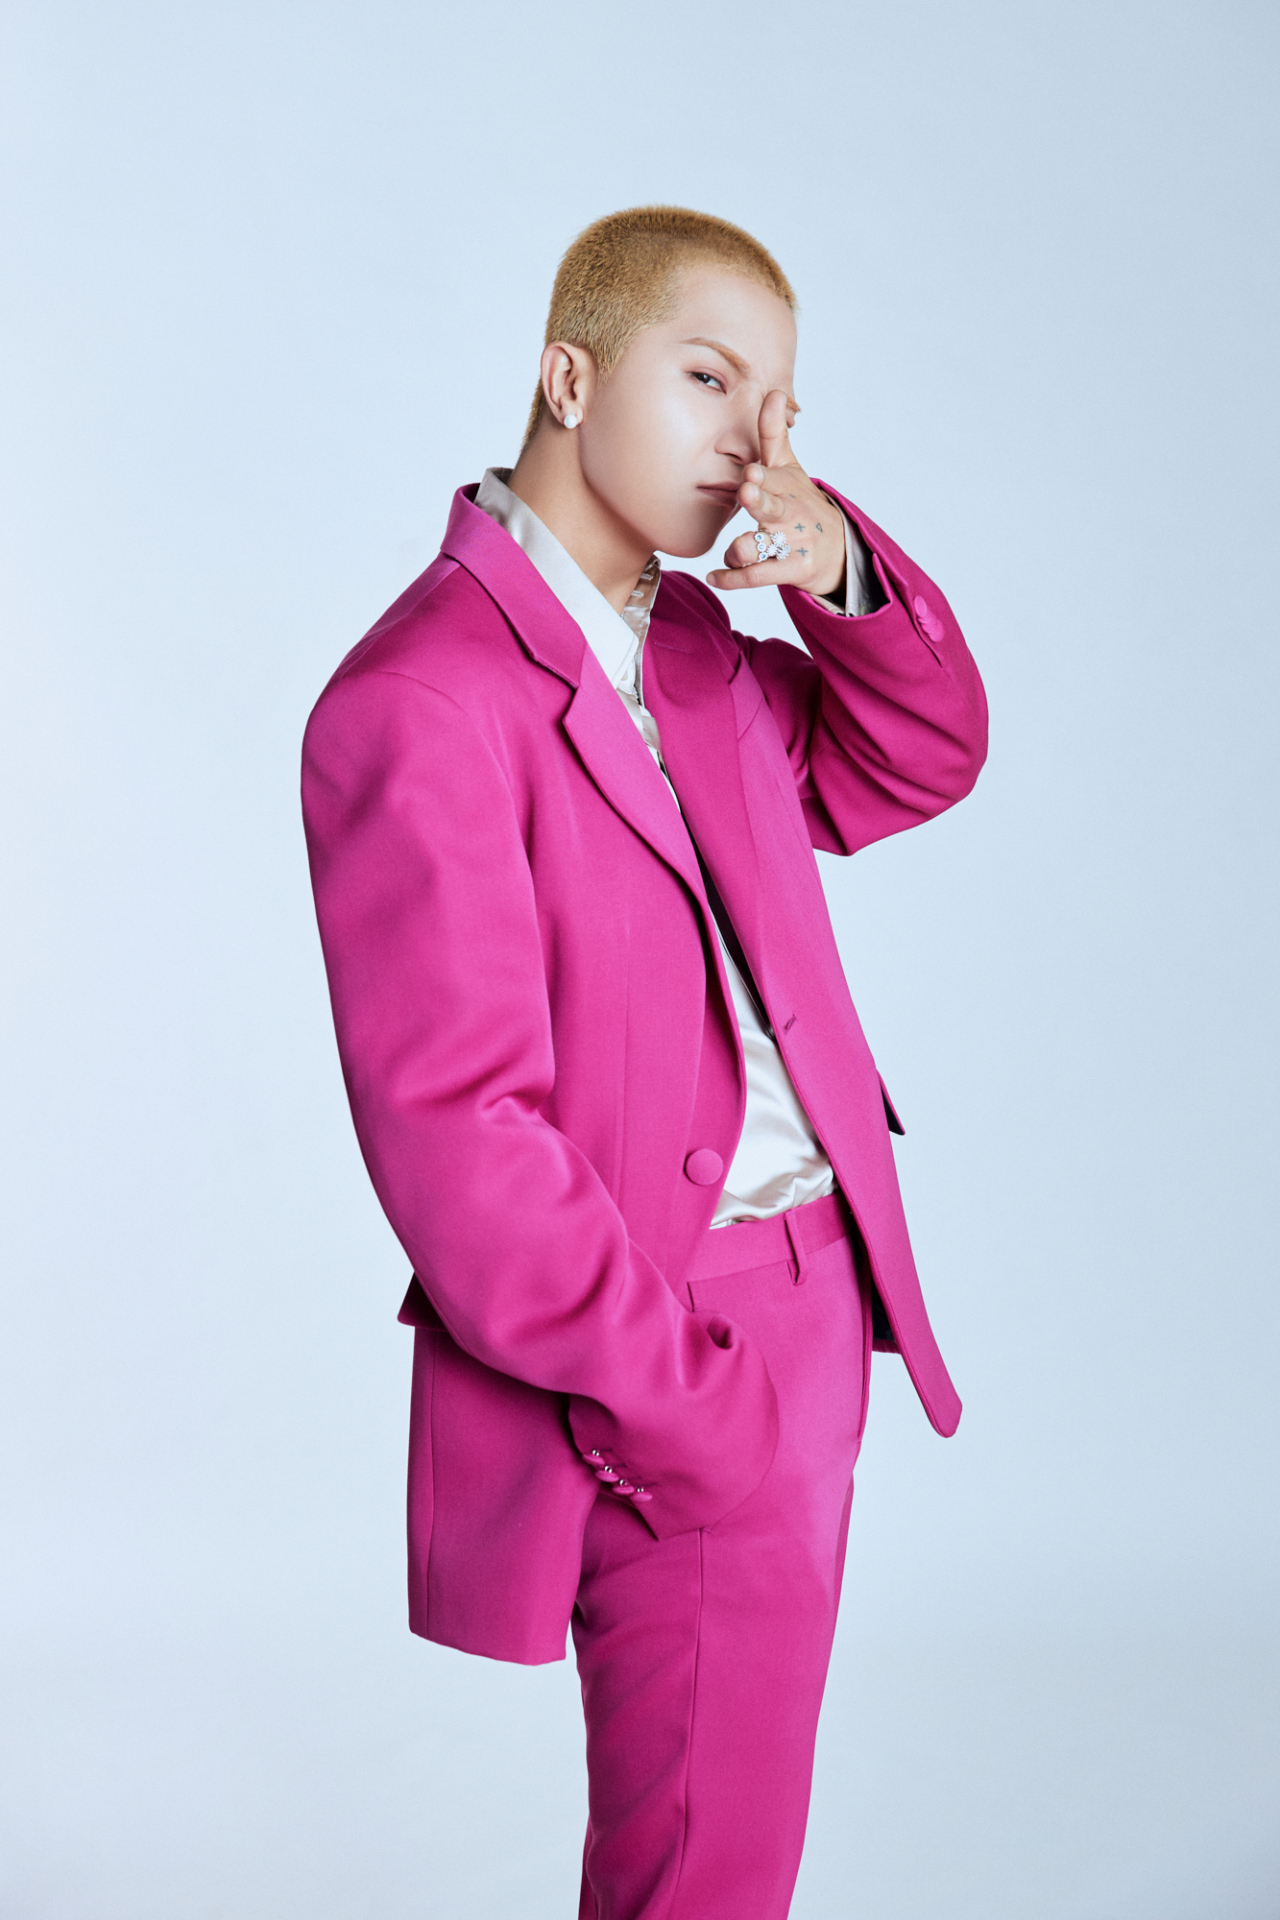 Mino poses during an online press conference Wednesday. (YG Entertainment)